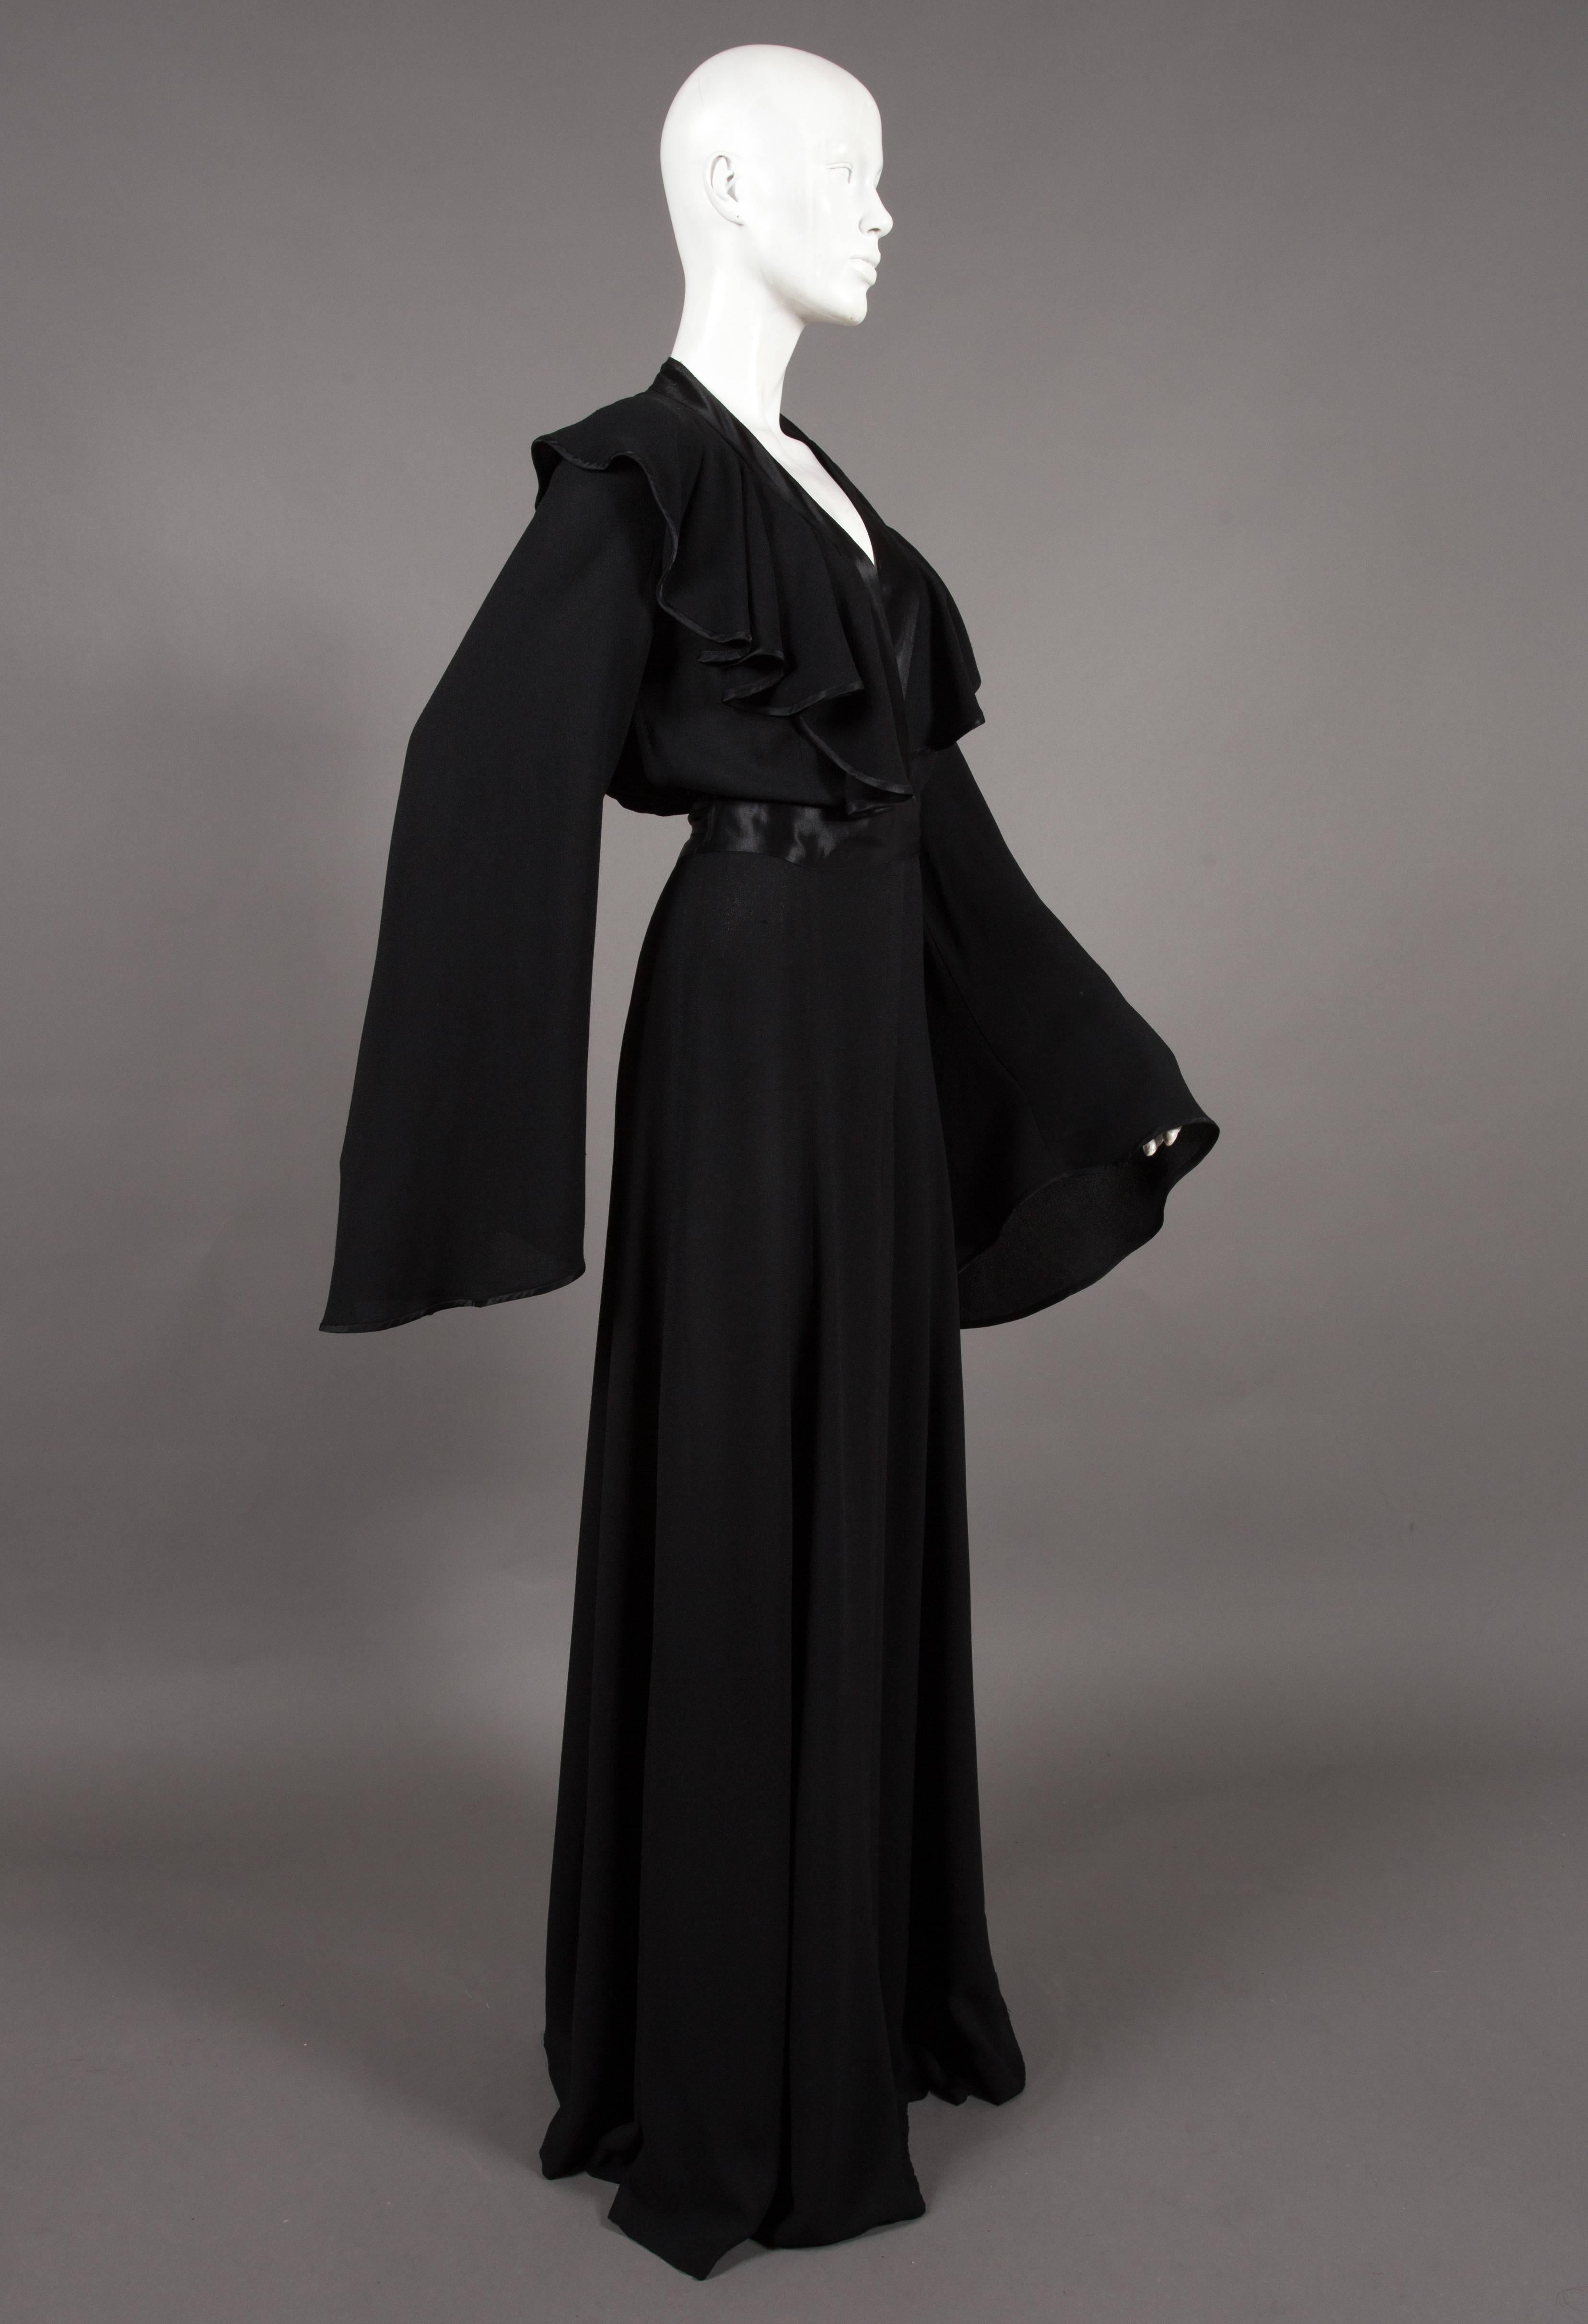 Rare Ossie Clark black moss crêpe wrap around evening dress, circa 1970, printed with the Ossie Clark couture label, size '12', with stain top stitched lapels and satin sash, full bell sleeves and leg slit.


Size: 
Shoulder to shoulder - 18